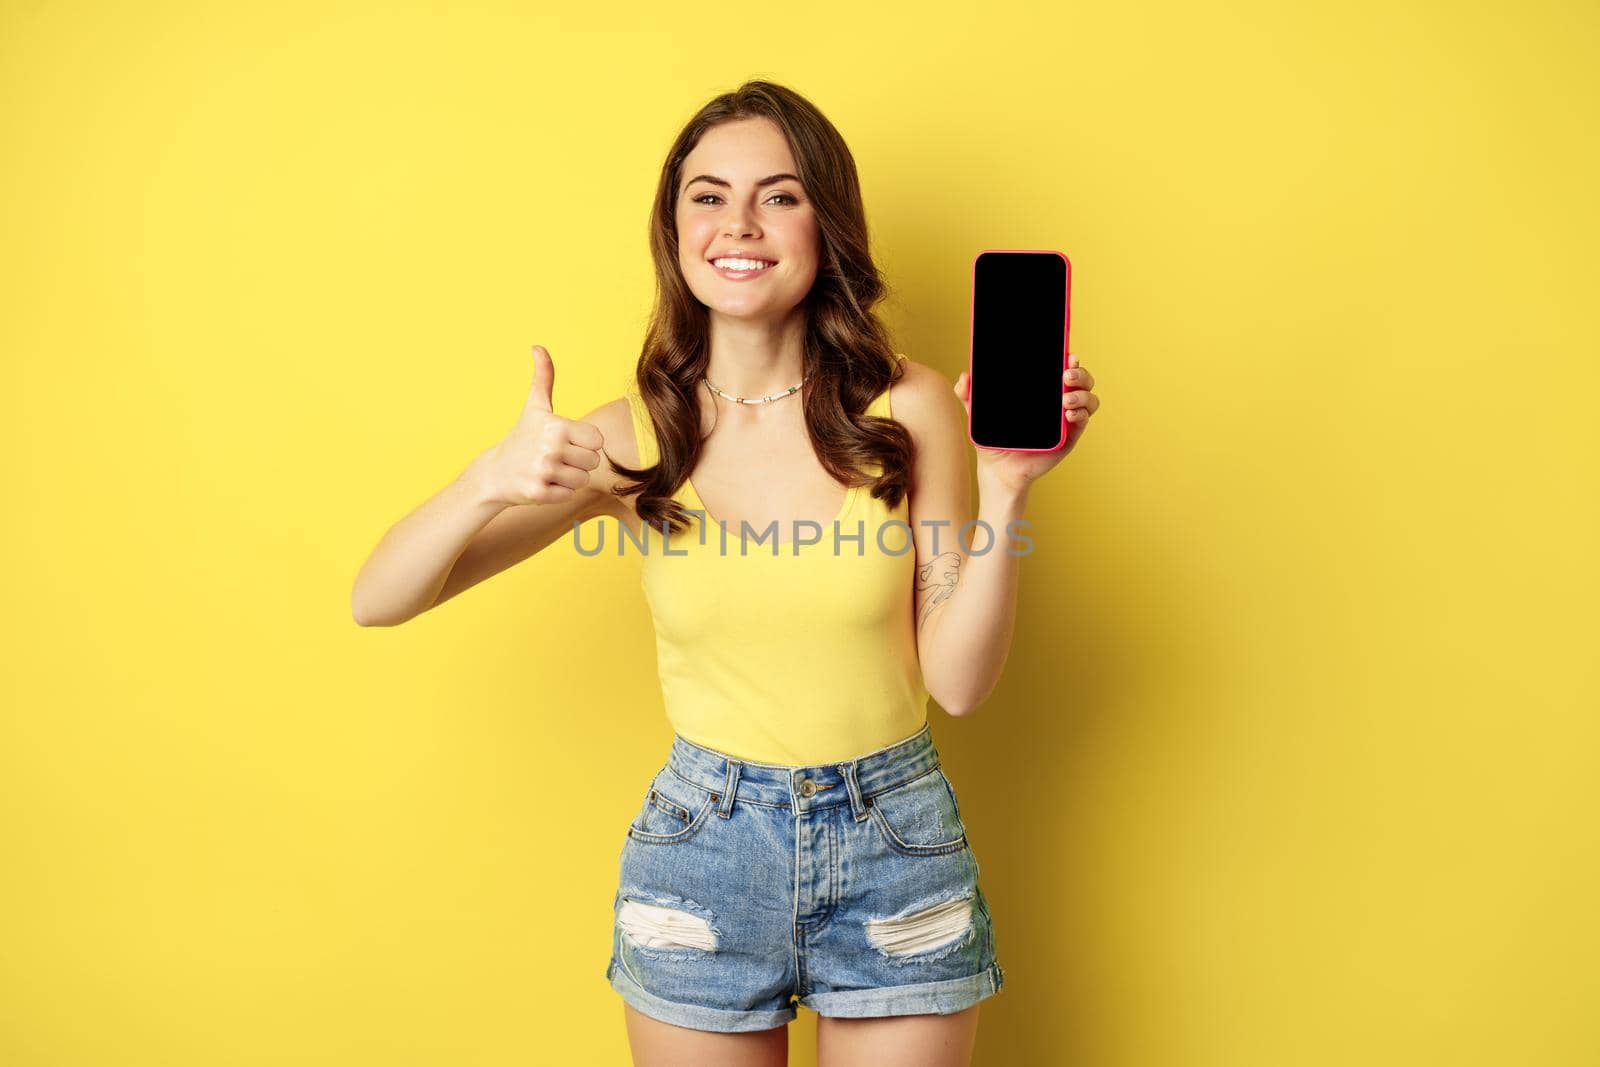 Happy smiling stylish girl showing thumbs up and smartphone app interface, mobile phone display, satisfied with website, online shopping application, standing over yellow background.